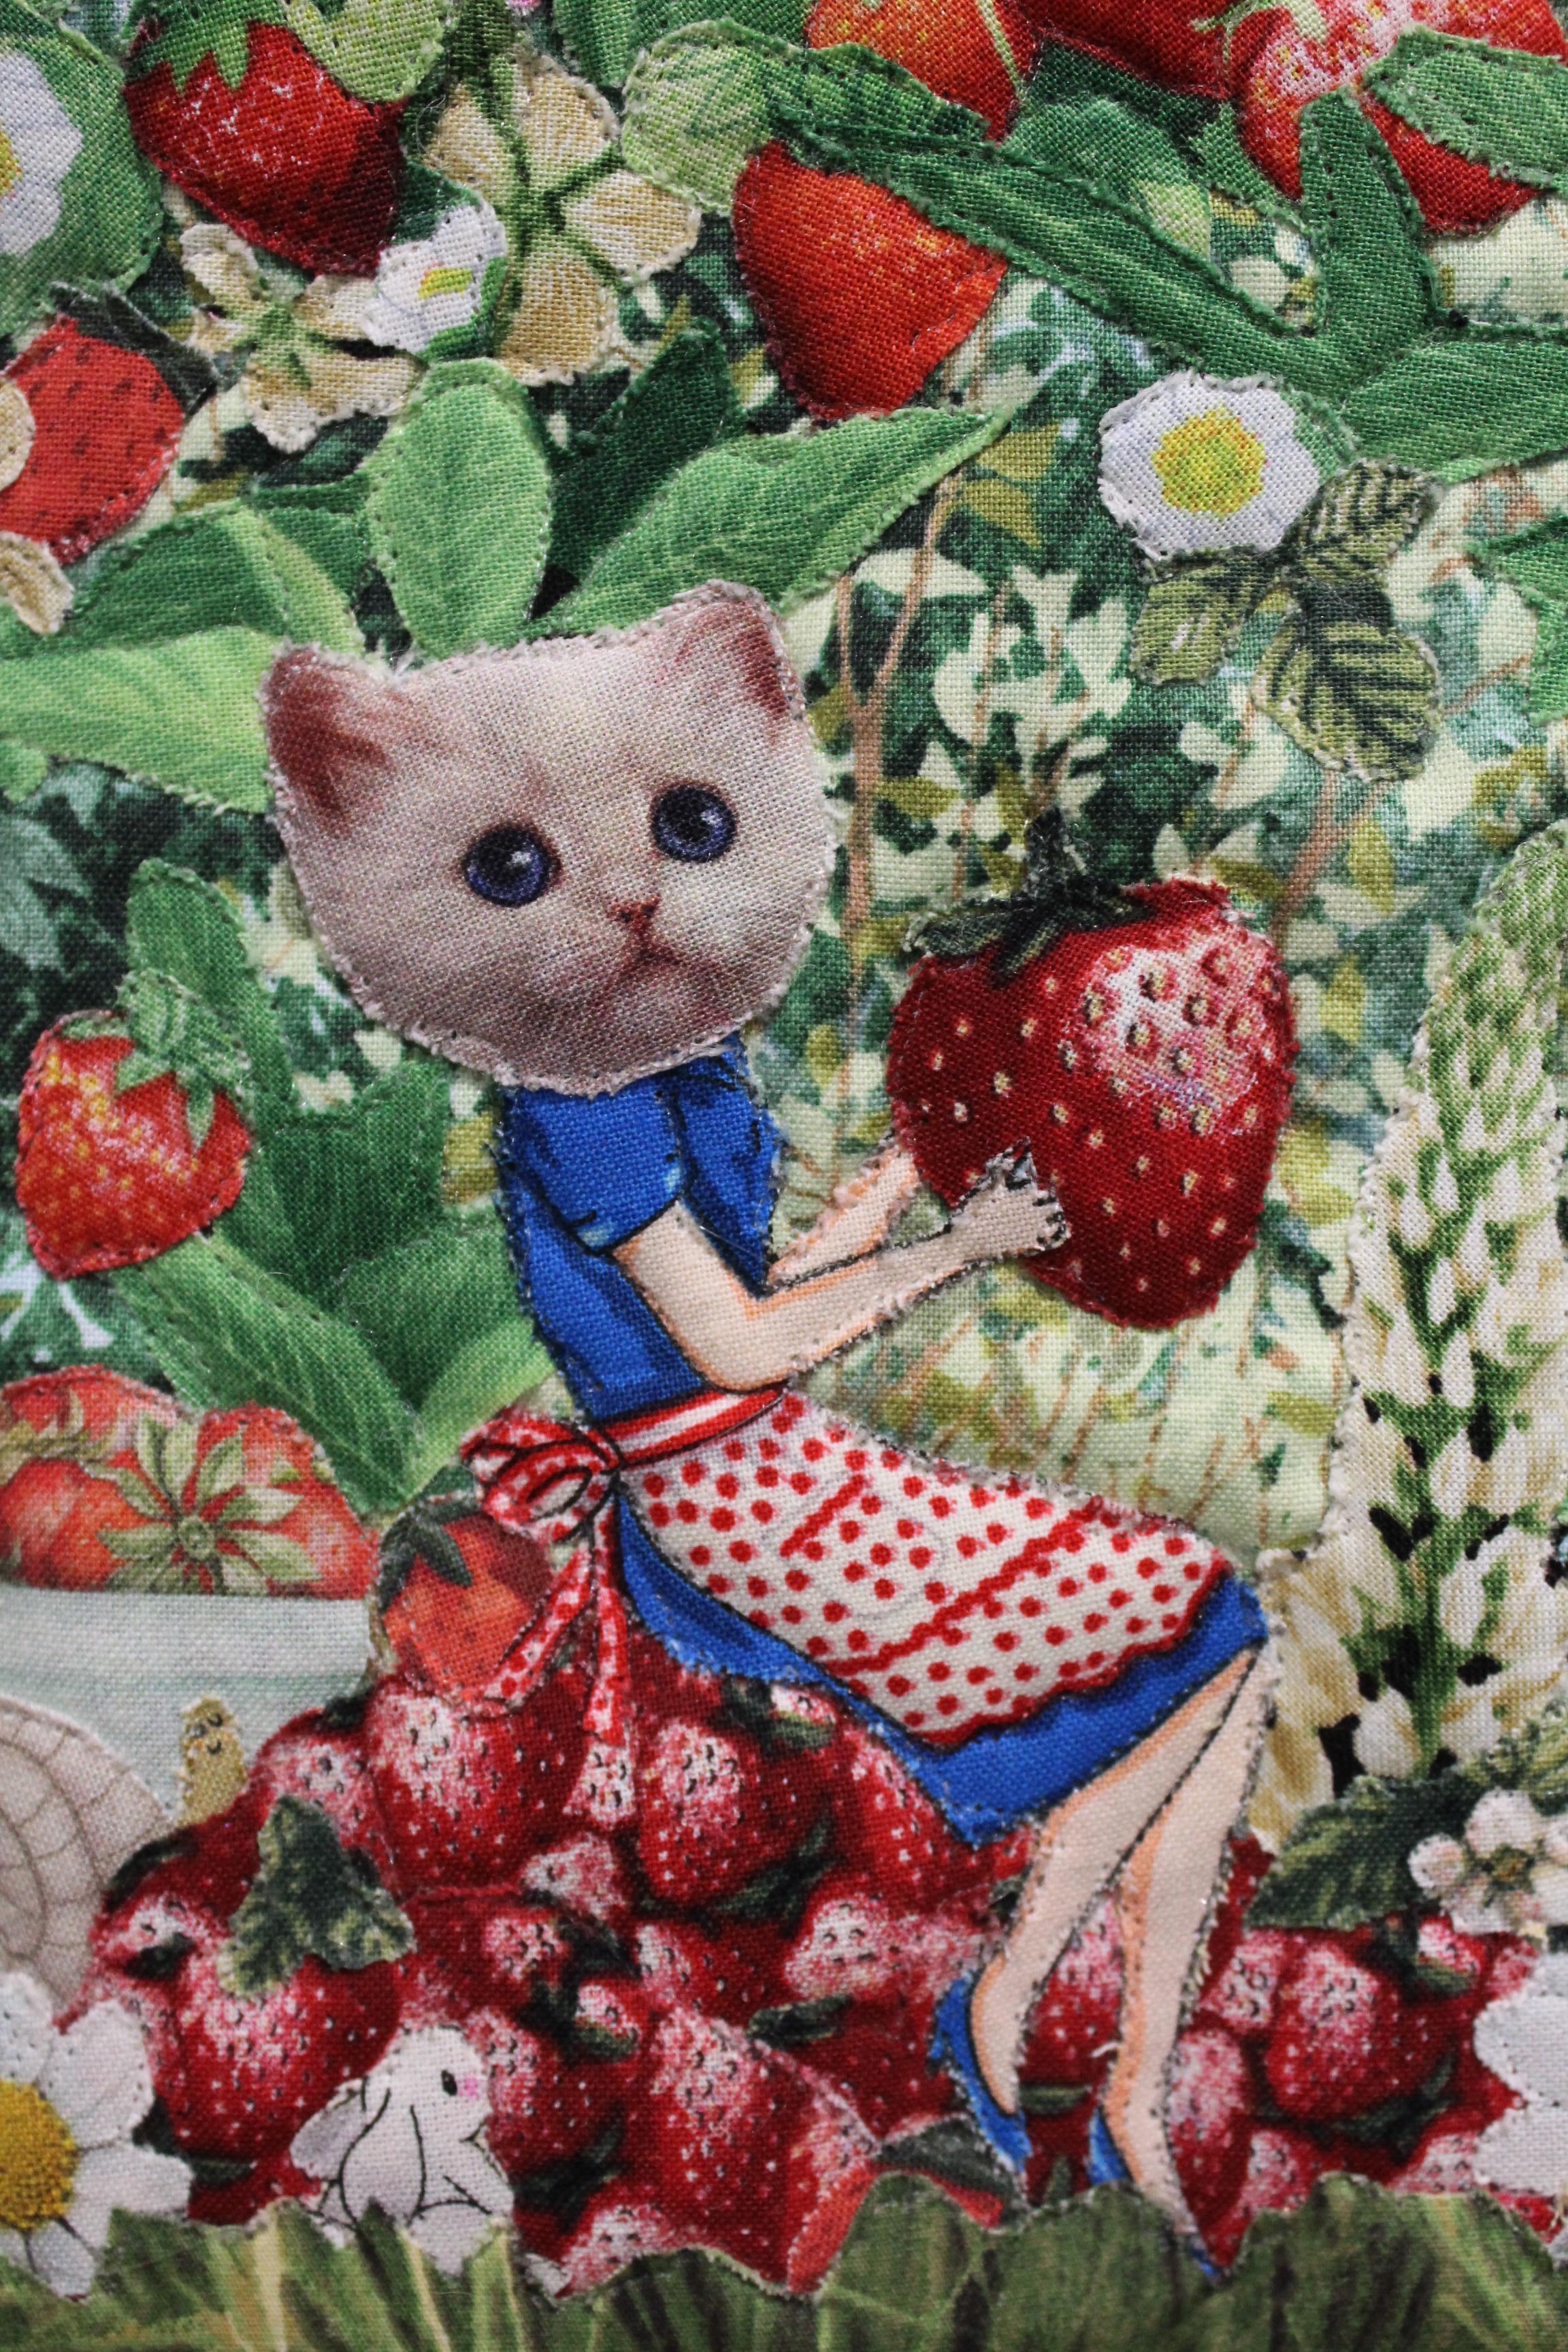 Strawberry Catgirlfriends For Sale 1